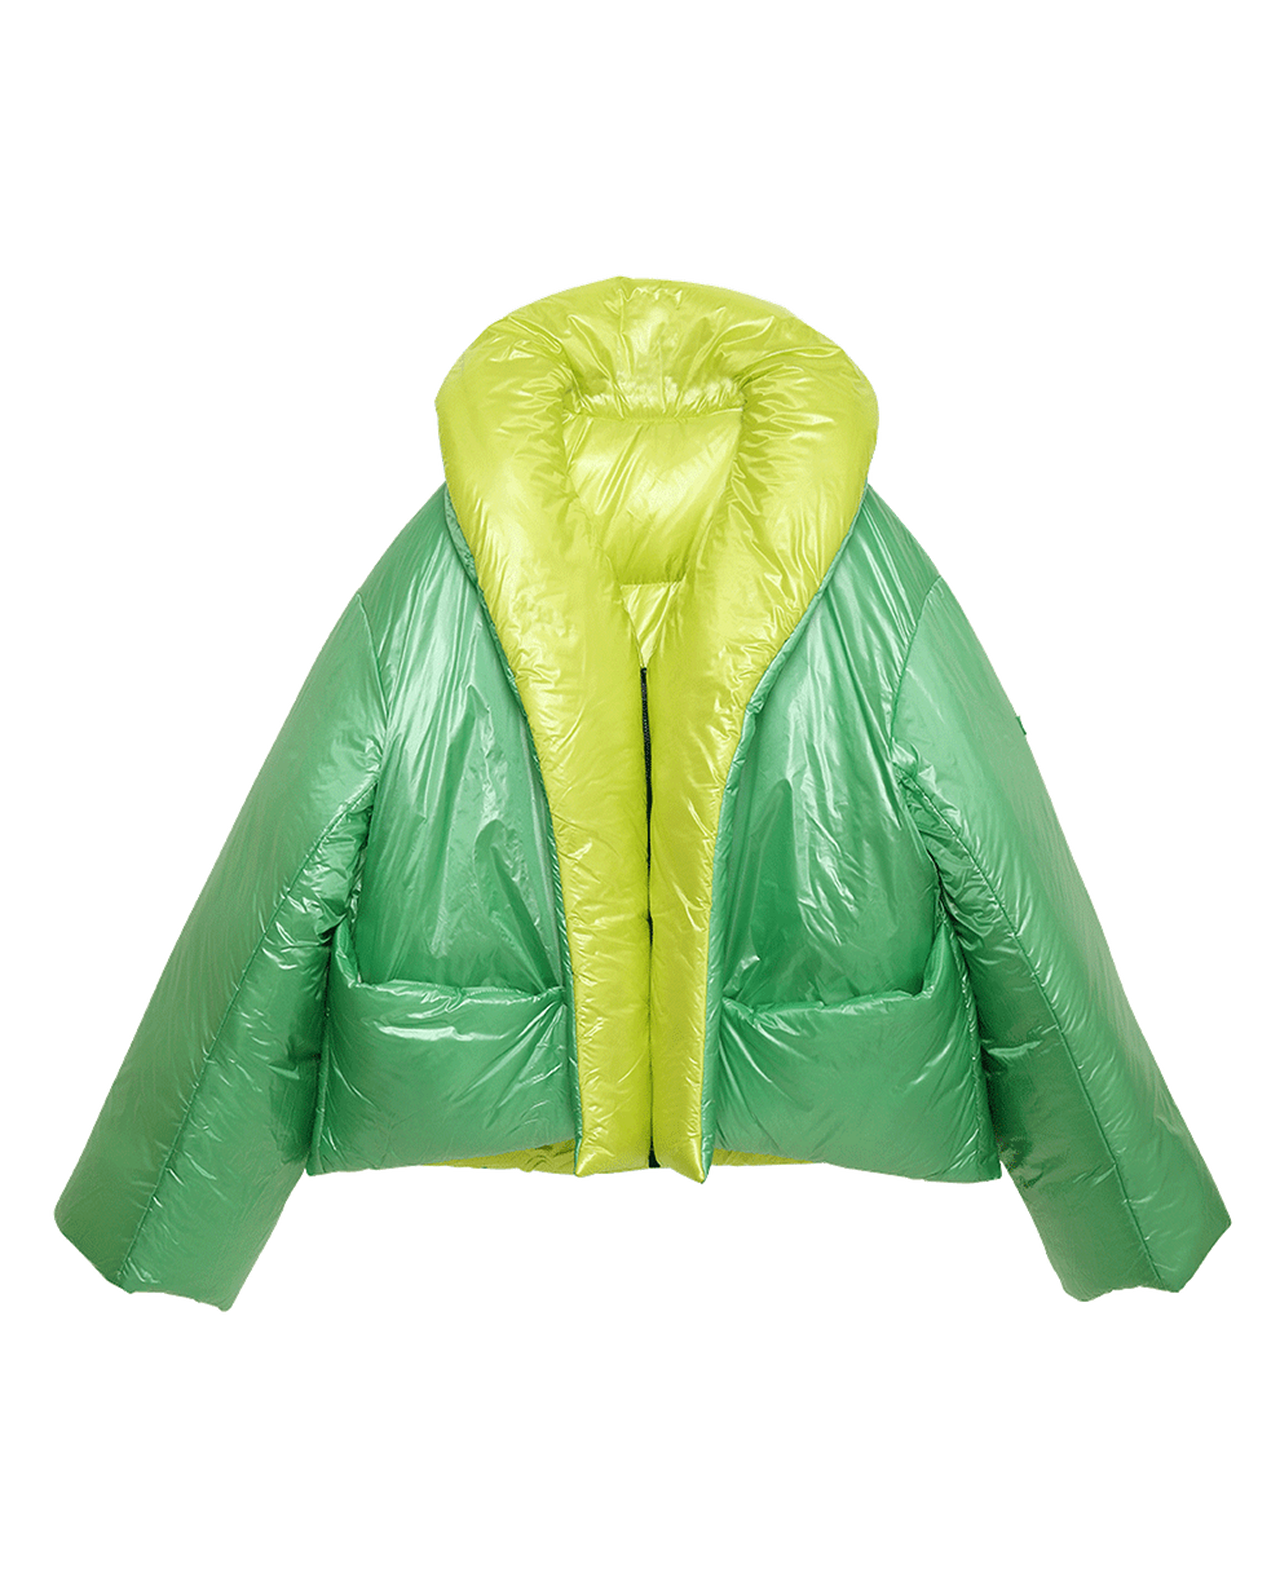 TATRAS × ZOE COSTELLO LIZZO MEN'S DOWN JACKET,LIME, large image number 3